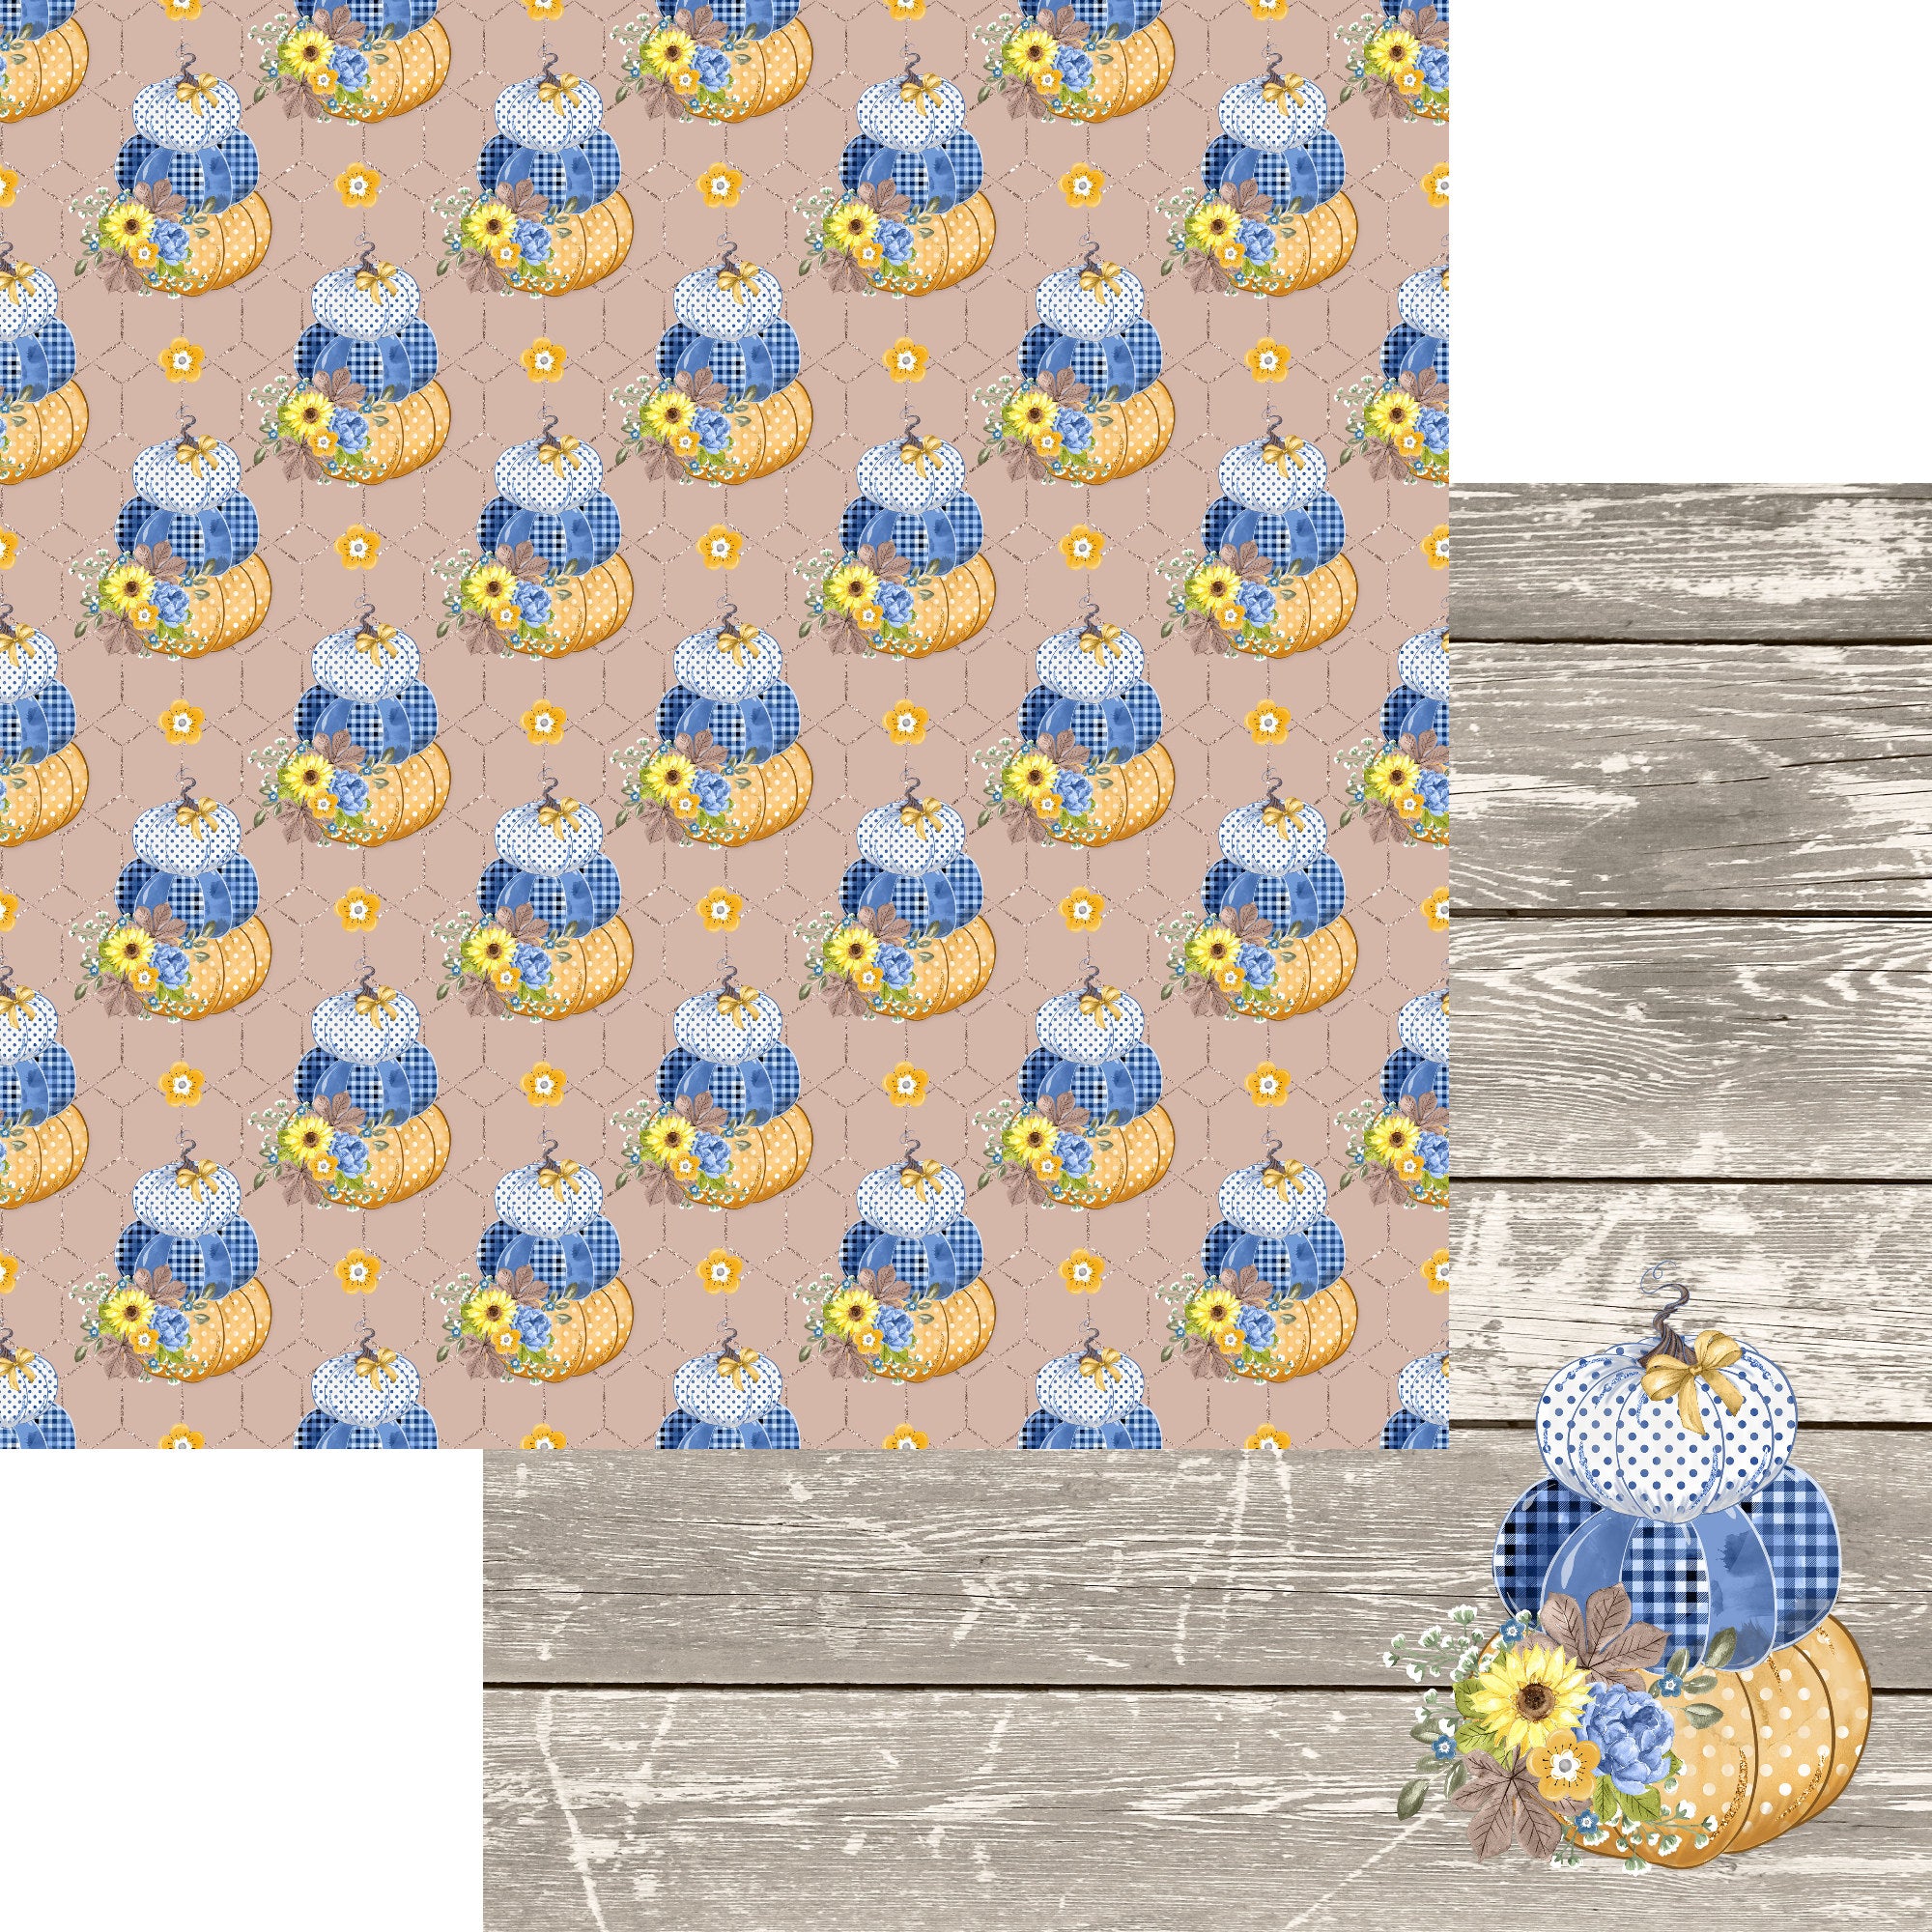 Bumblebee Fall Collection Pumpkin Patch 12 x 12 Double-Sided Scrapbook Paper by SSC Designs